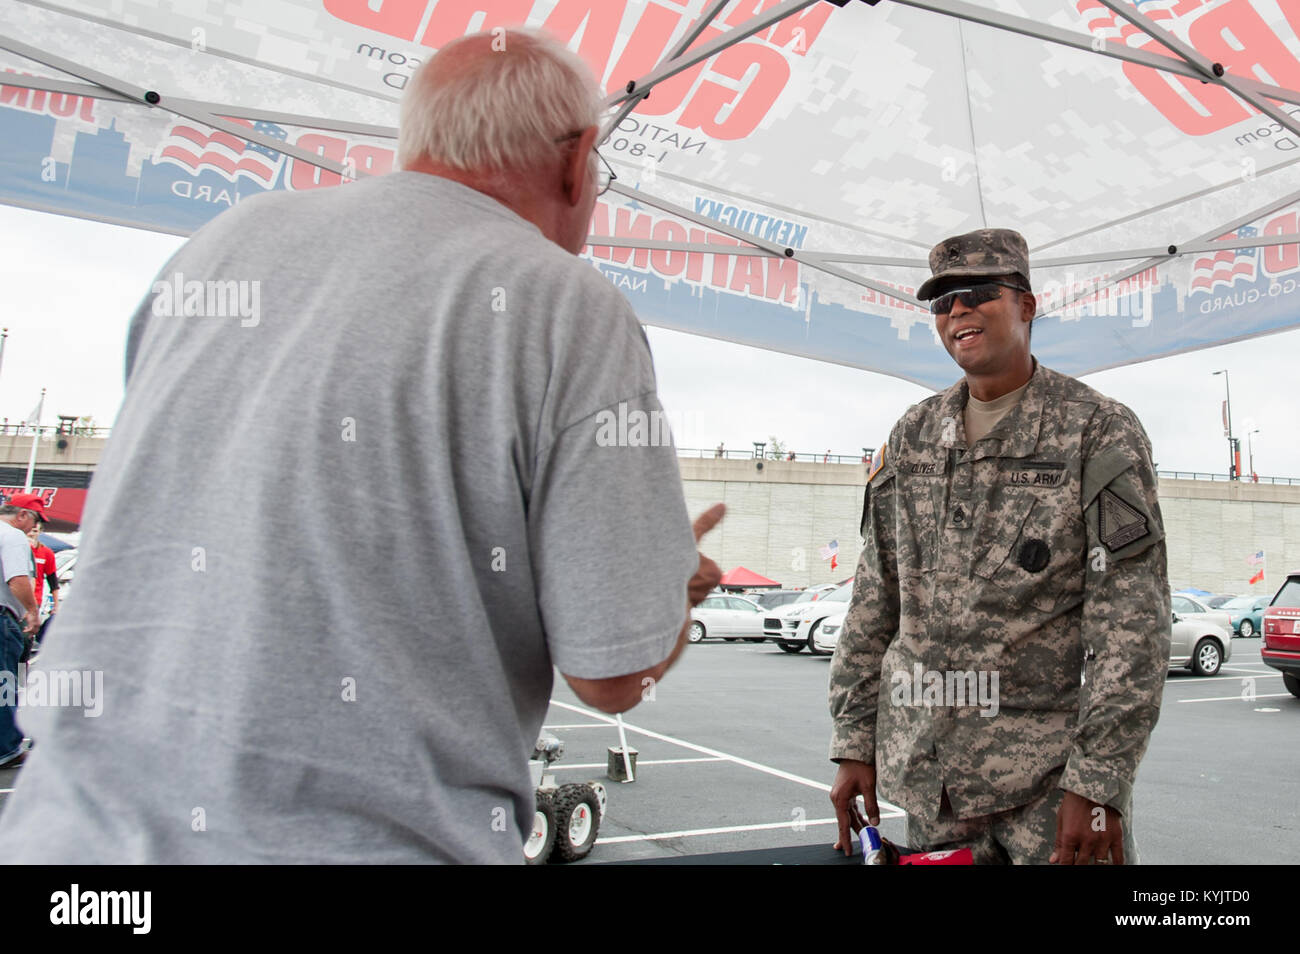 Army Staff Sgt. Michael Oliver, a recruiter for the Kentucky Army National Guard, speaks with a football fan outside Papa John’s Cardinal Stadium in Louisville, Ky., prior to the University of Louisville – Murray State football game Sept. 6, 2014. The game, billed as Military Appreciation Day, began with a coin toss executed by Air Force Brig. Gen. Warren Hurst, the Kentucky National Guard's assistant adjutant general for Air and commander of the Kentucky Air National Guard. (U.S. Air National Guard photo by Maj. Dale Greer/Released) Stock Photo